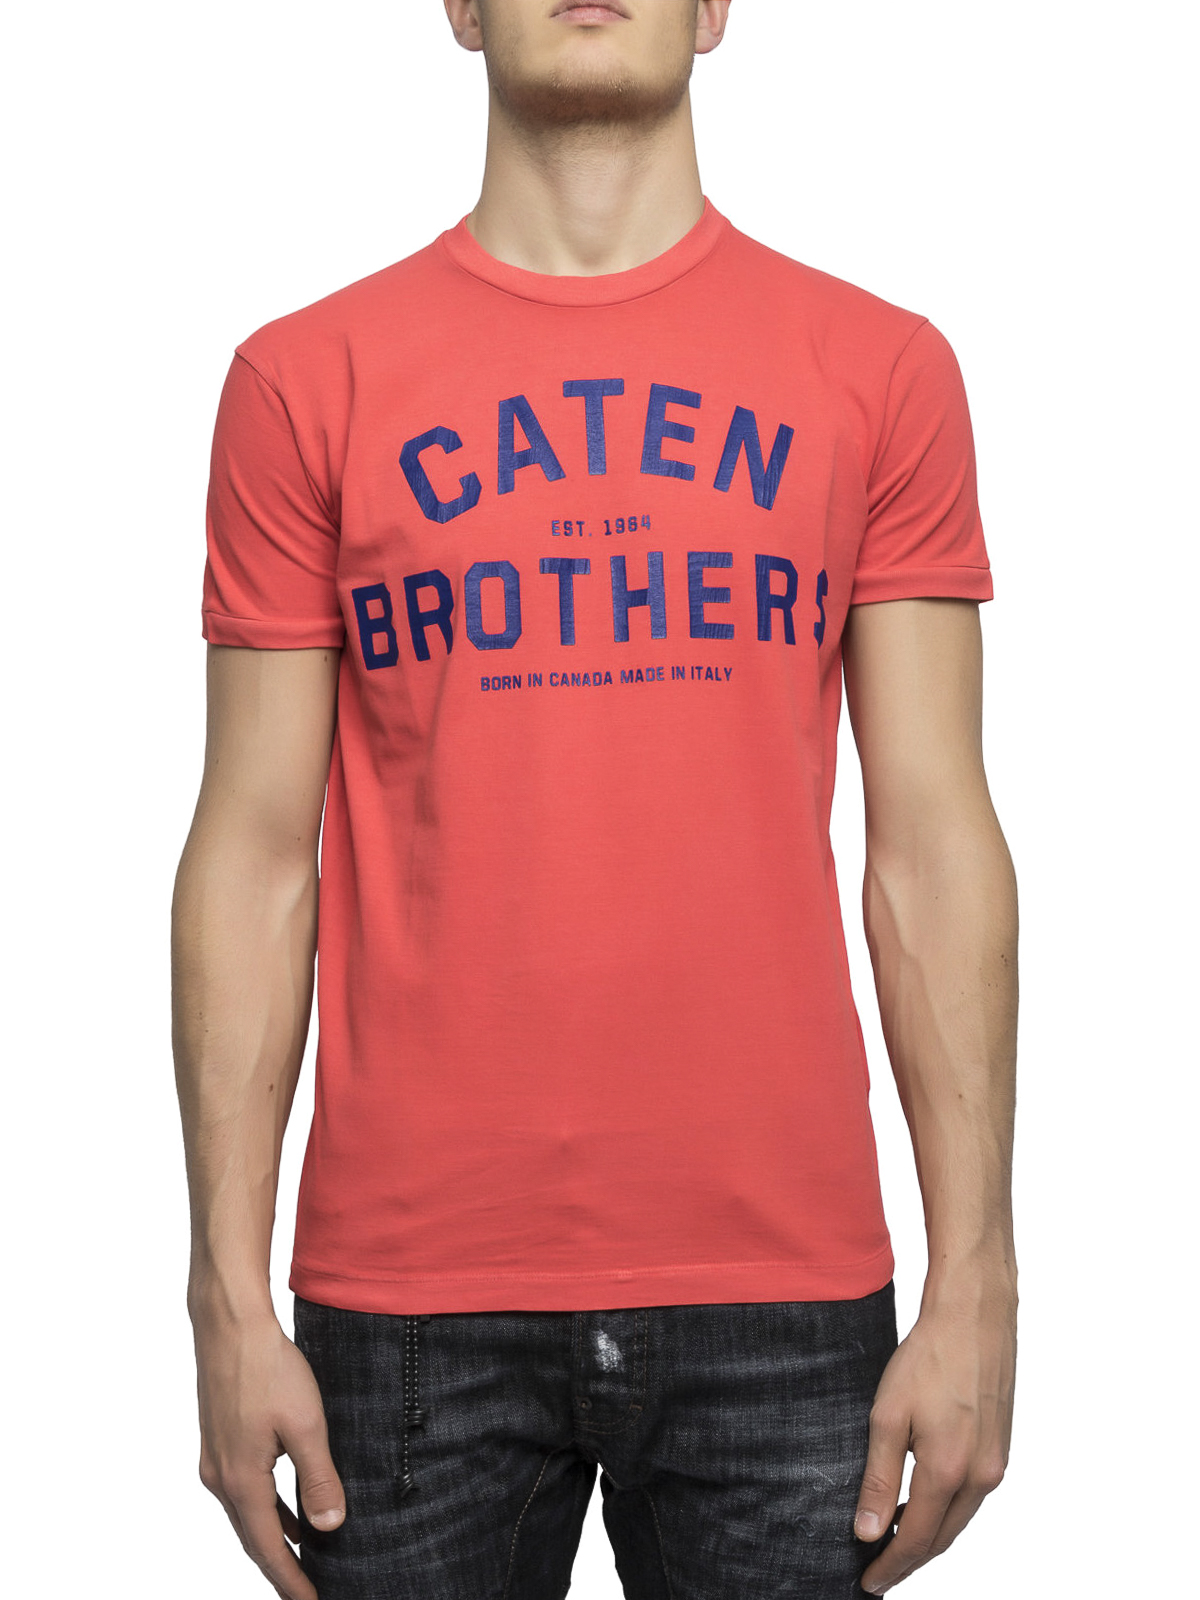 Stimulans Bangladesh Wijzer T-shirts Dsquared2 - Caten Brothers cotton Tee - S74GD0200S20694304